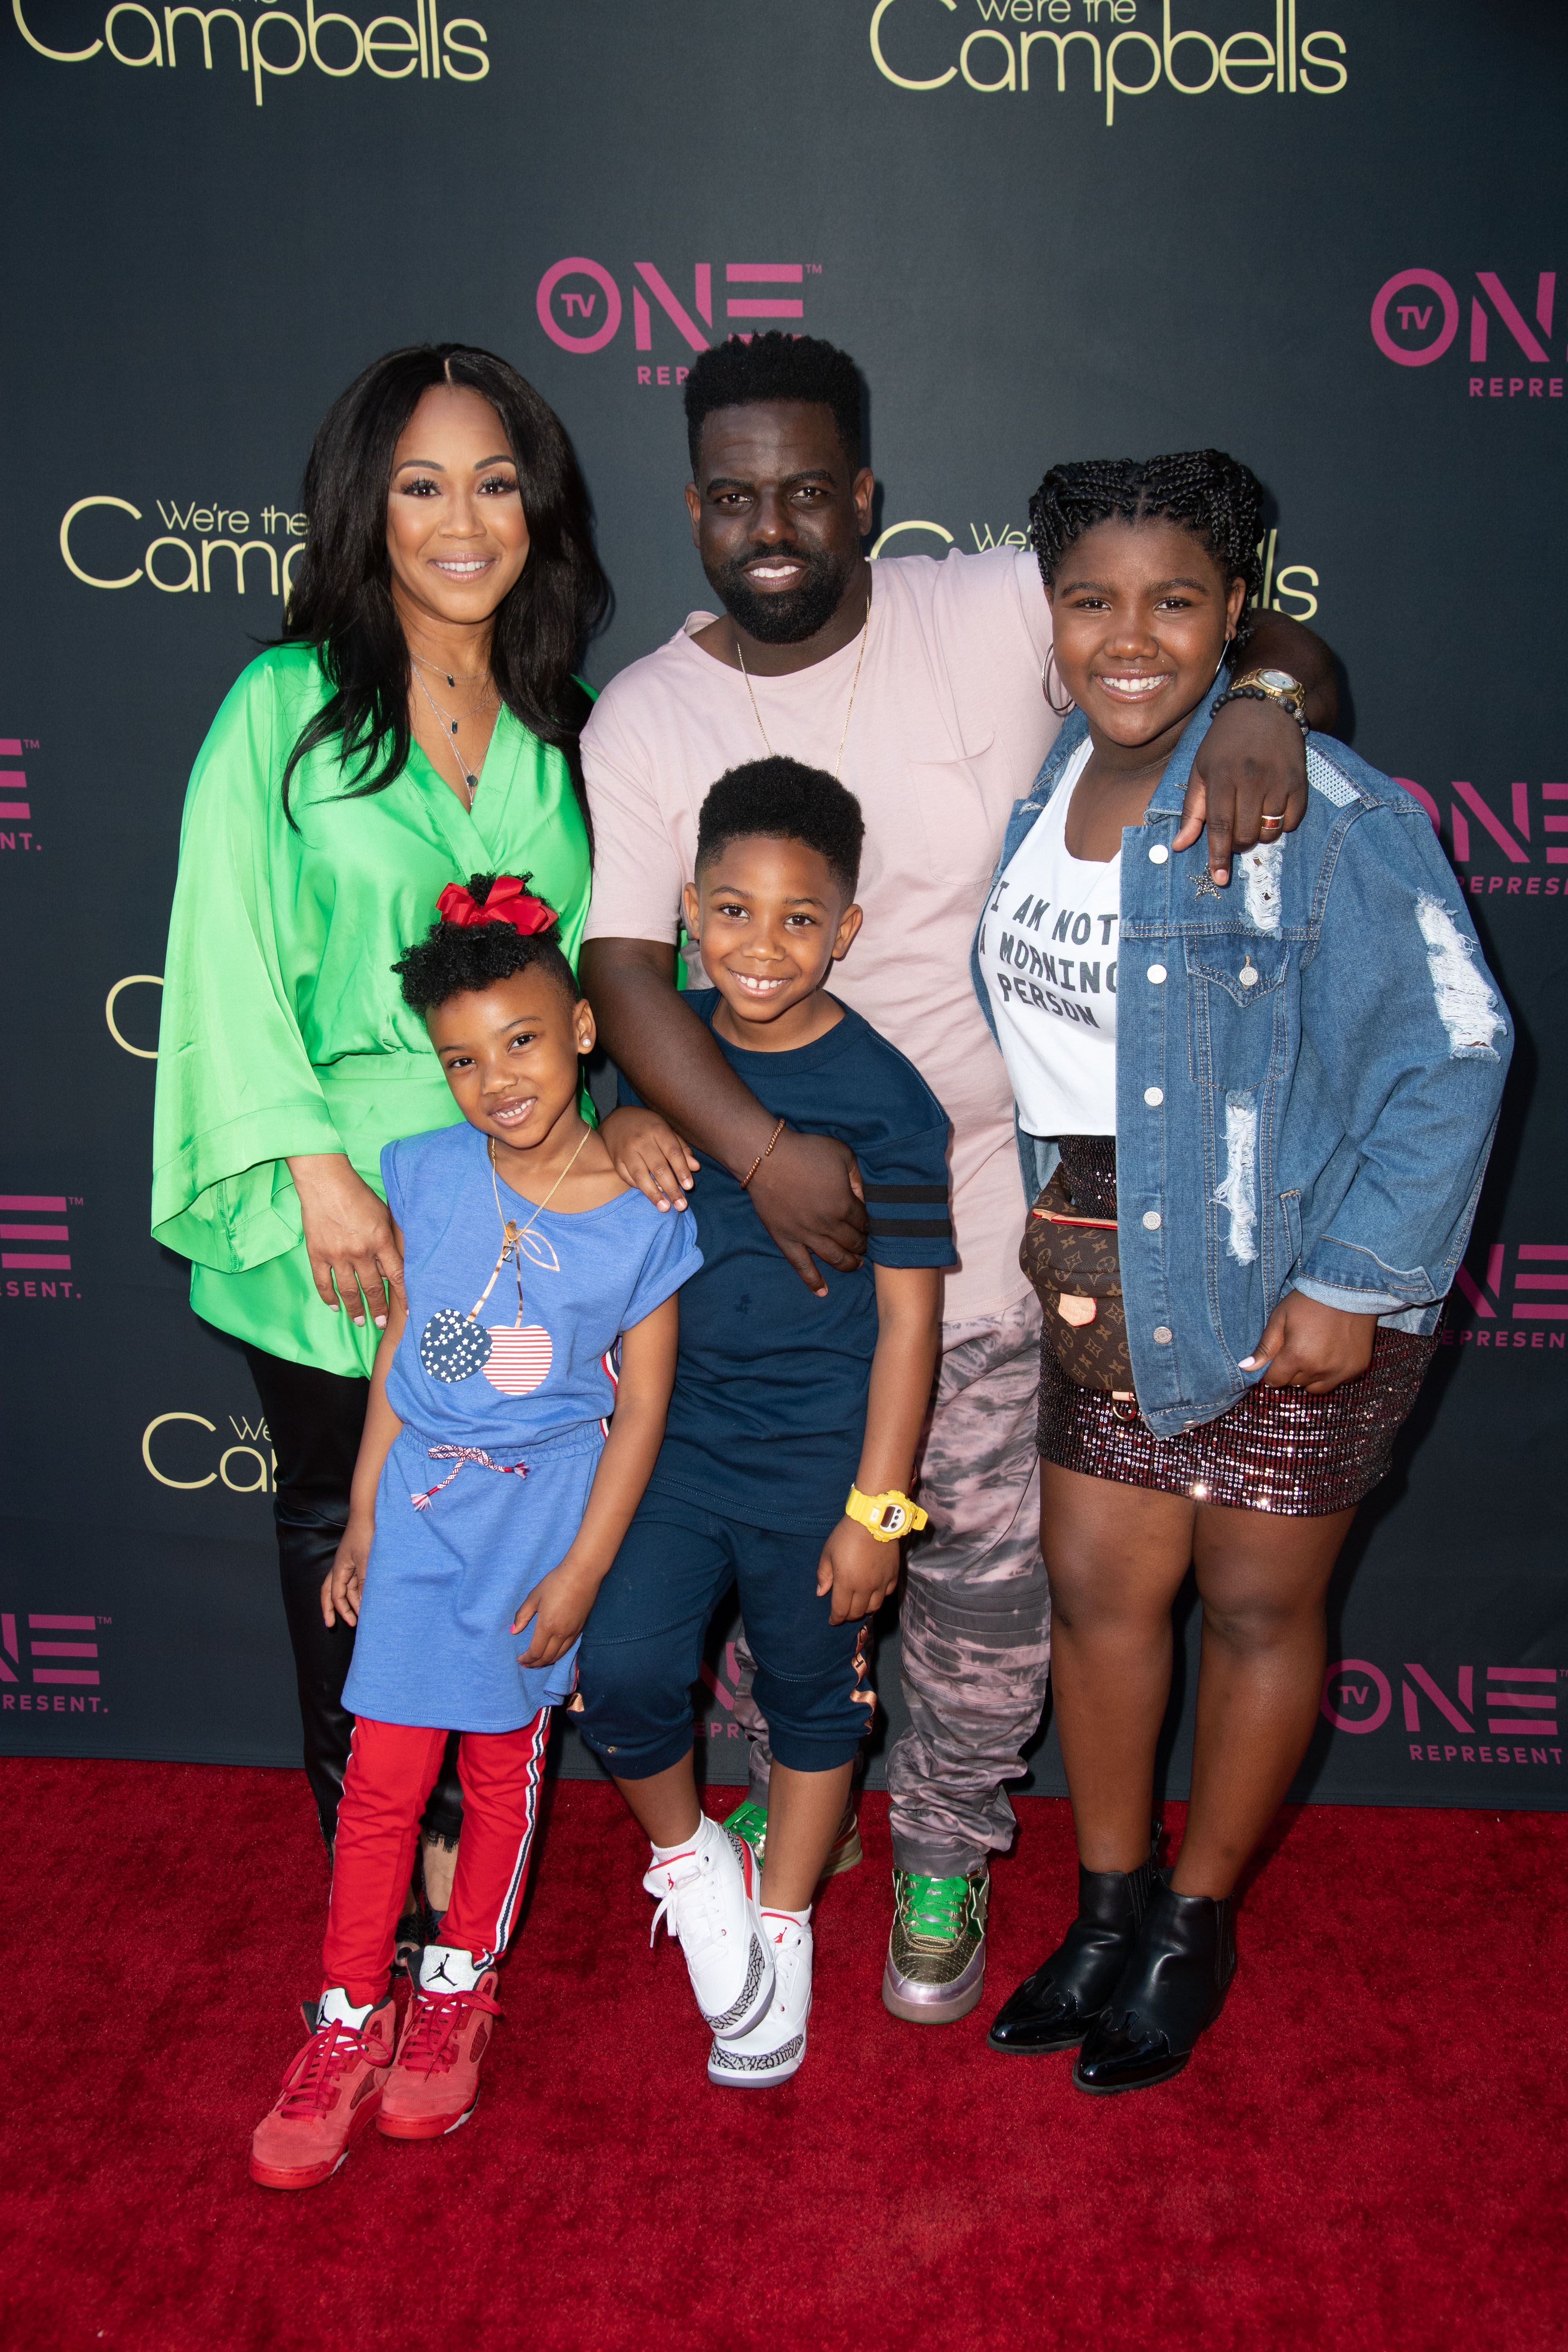 Erica and Warryn Campbell with their kids attend the "We're The Campbells" Special Screening in California on June 11, 2018 | Source: Getty Images